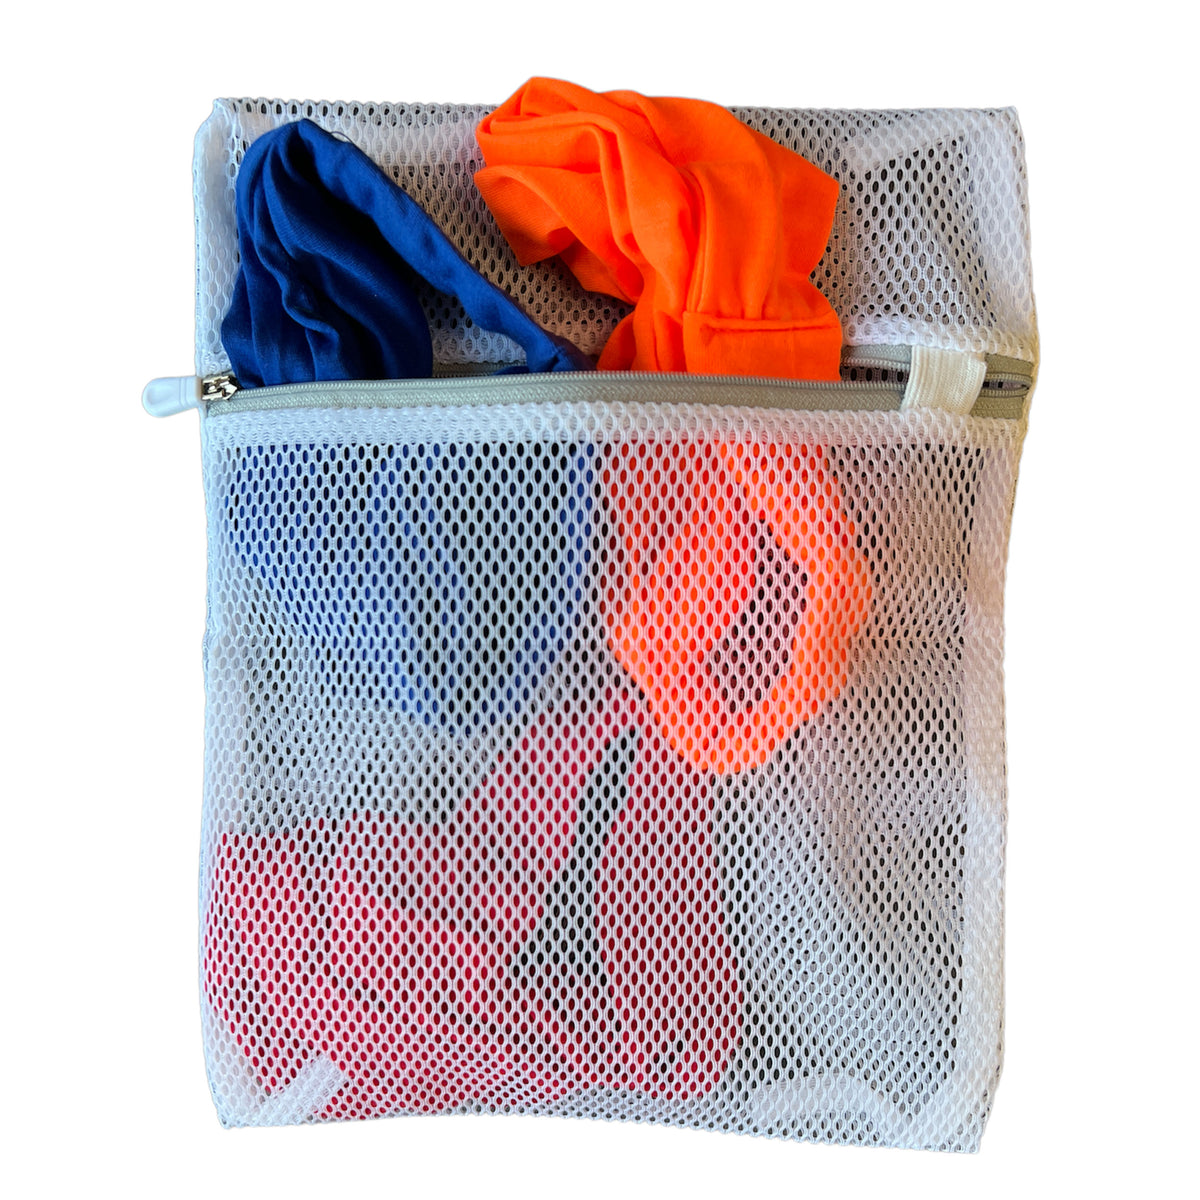 Laundry net / Laundry bag white with zipper (protects satin in the